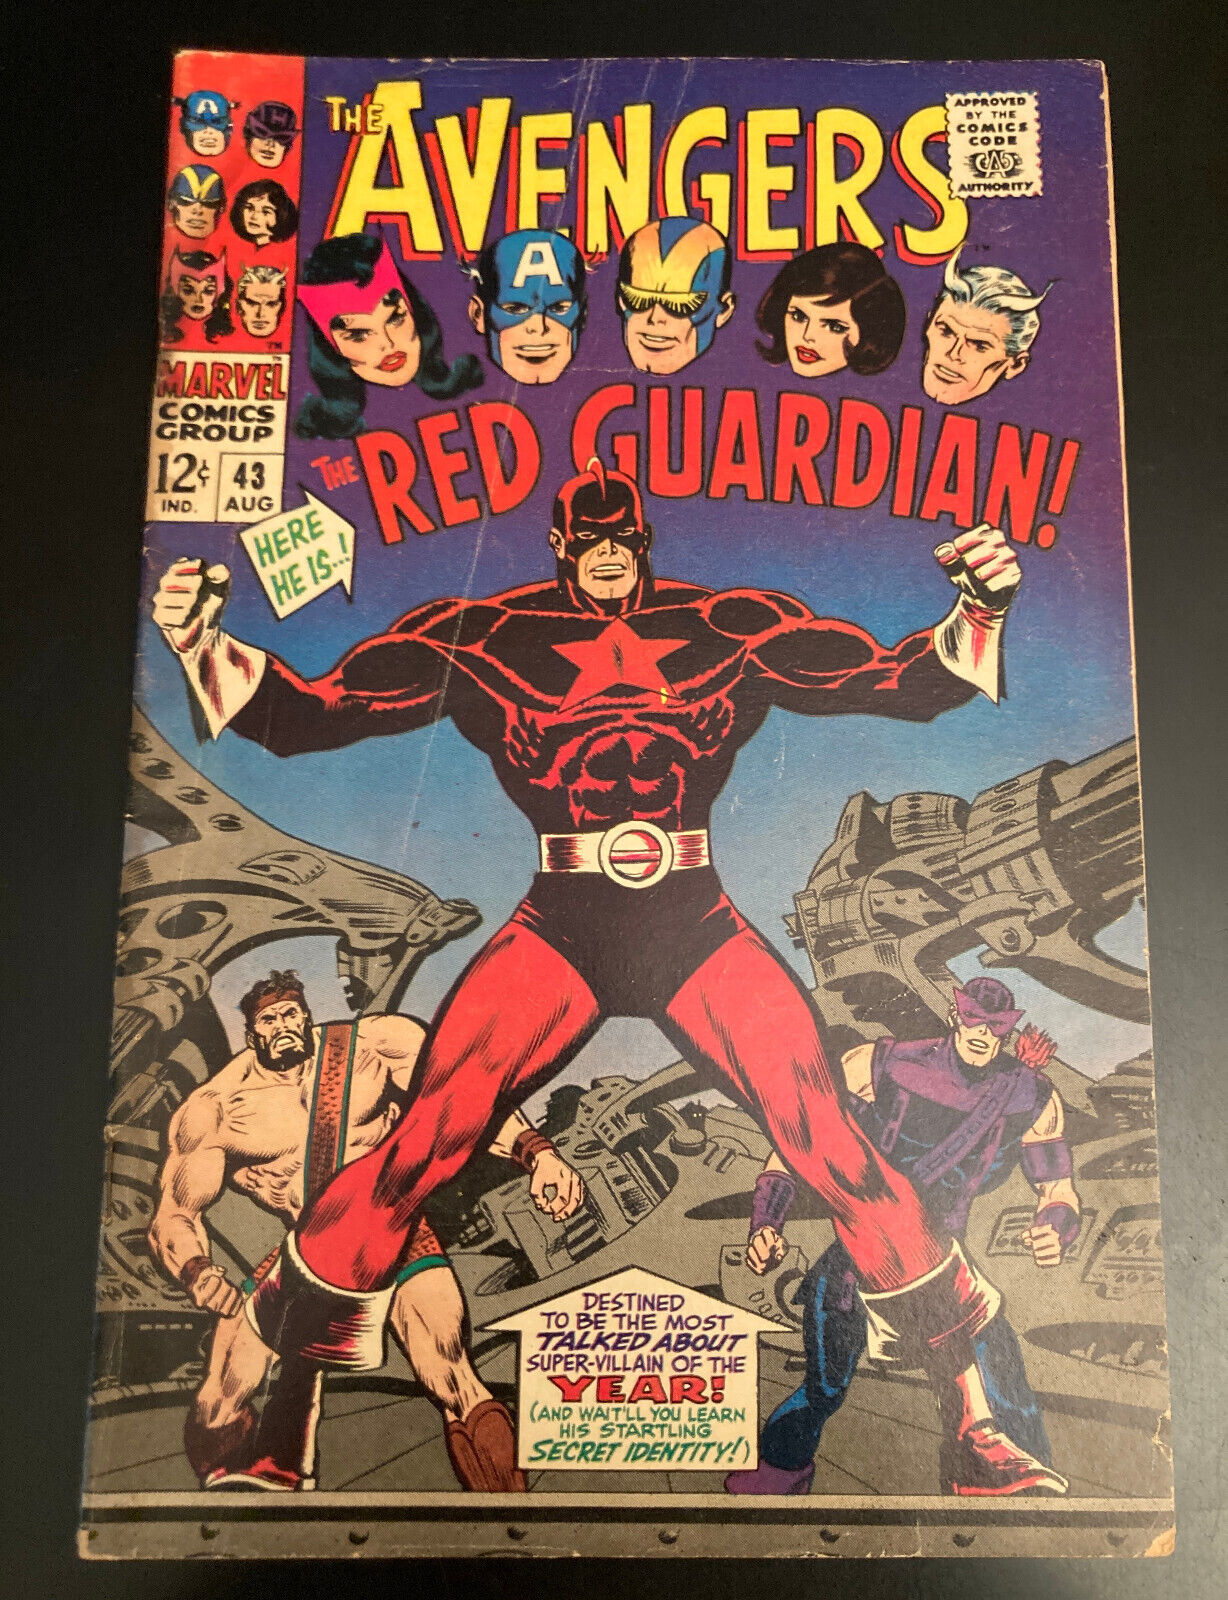 THE AVENGERS #43 (Marvel/1967) *Red Guardian Key* Strong Color & Brightness